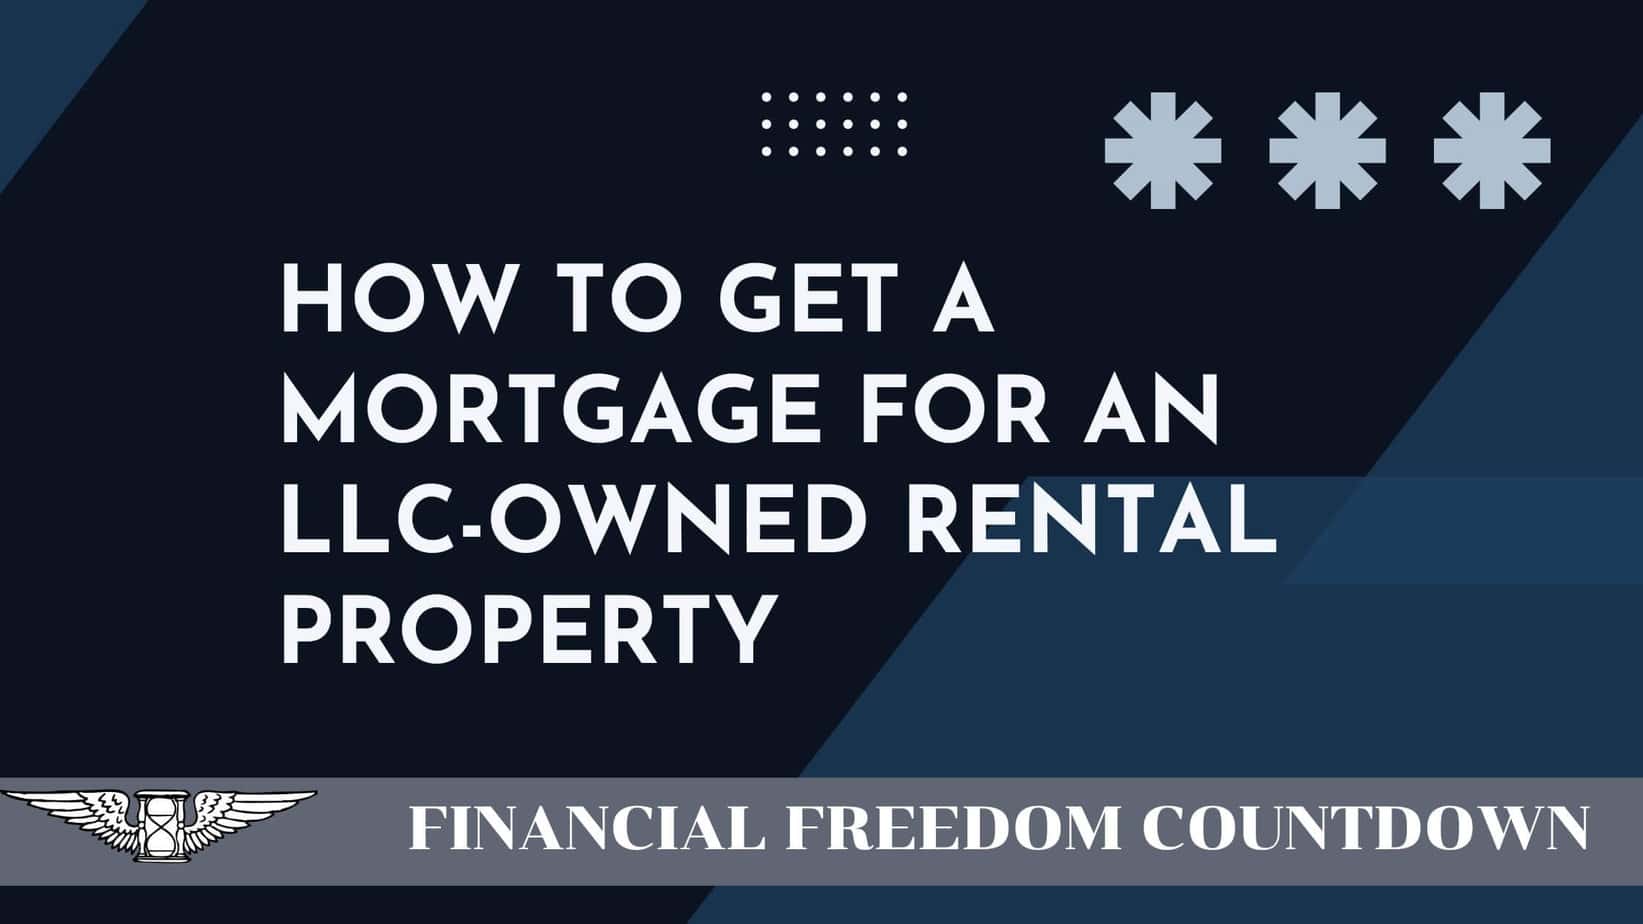 Mortgage for an LLC-Owned Rental Property